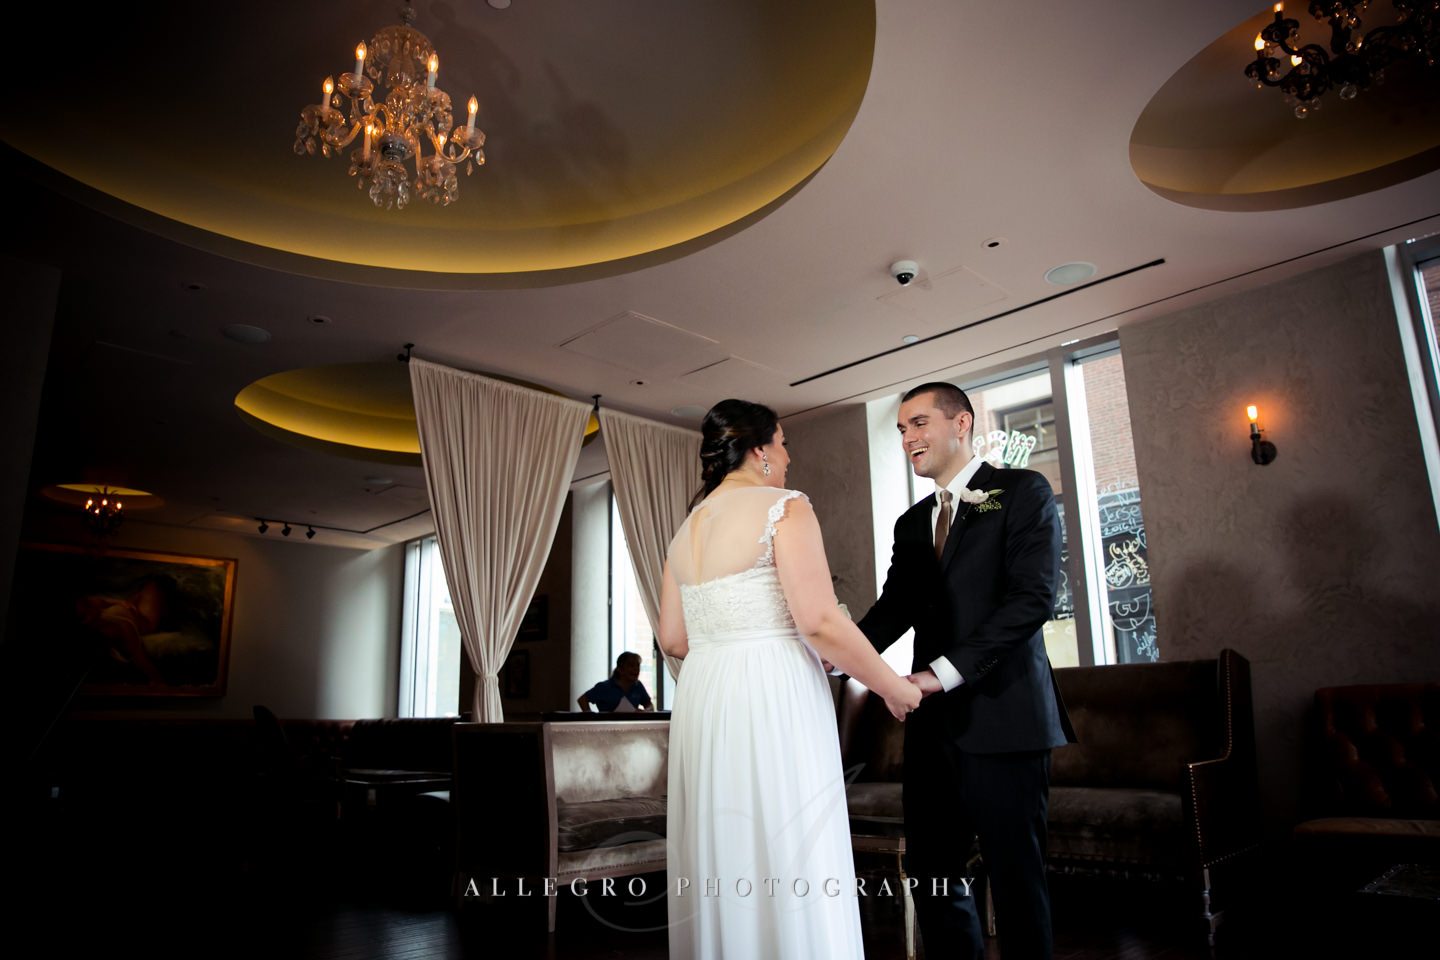 checking her dress out -photo by Allegro Photography